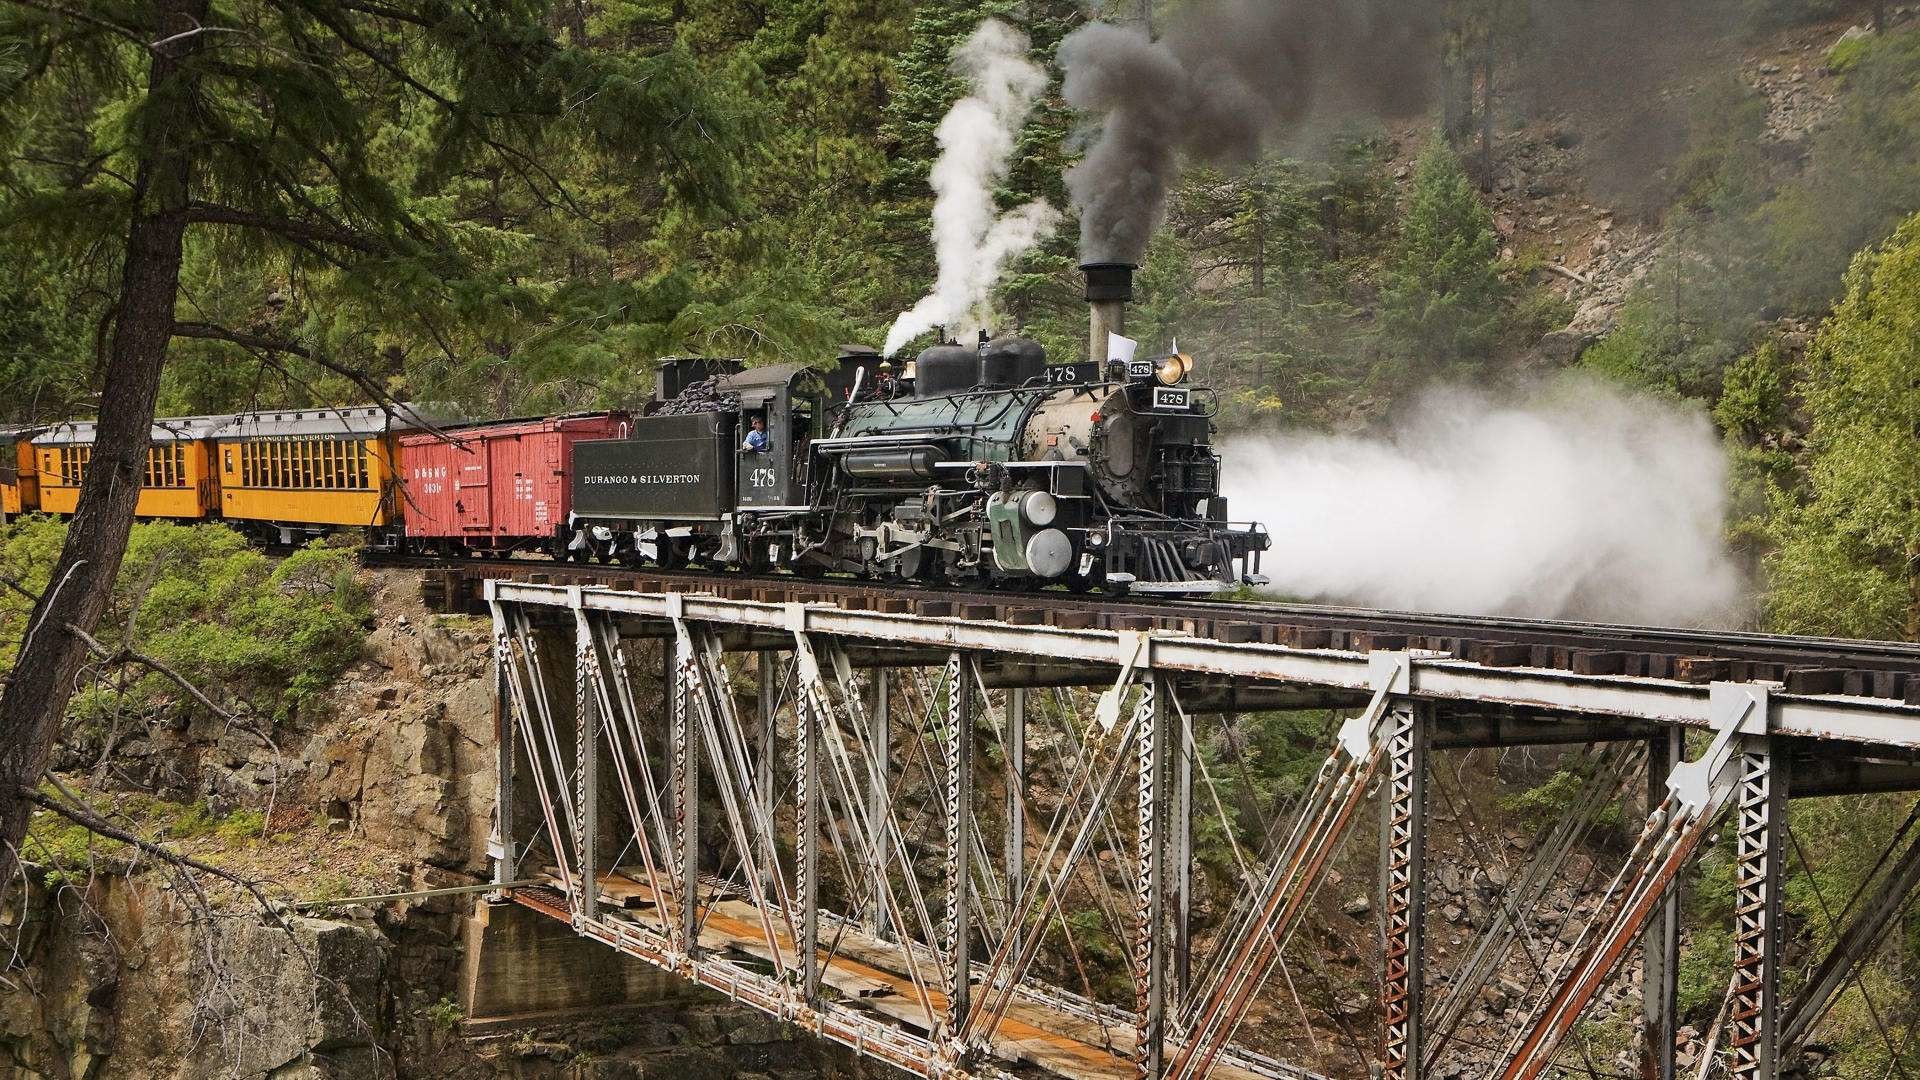 1920x1080 Colorado Steamtrain over Bridge HD Wallpaper in Full HD from the Trains  category.